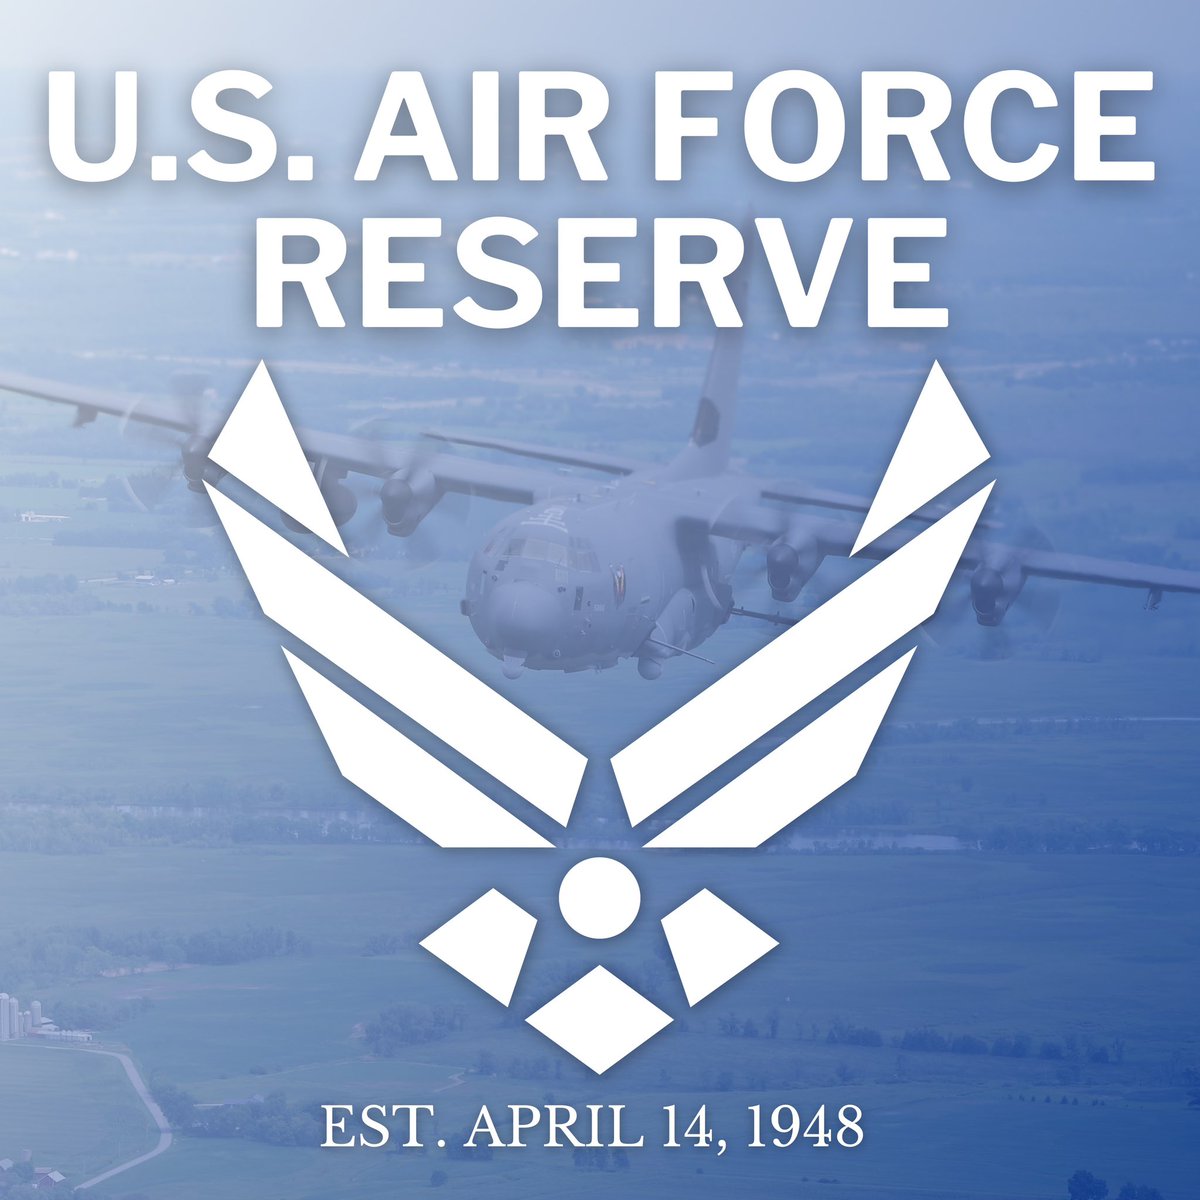 The @USAFReserve was founded on this day 76 years ago.  Happy Birthday to the U.S. Air Force Reserve.   Texans from across the state are forever thankful for the brave men and women who selflessly serve our country.  Fly. Fight. Win!